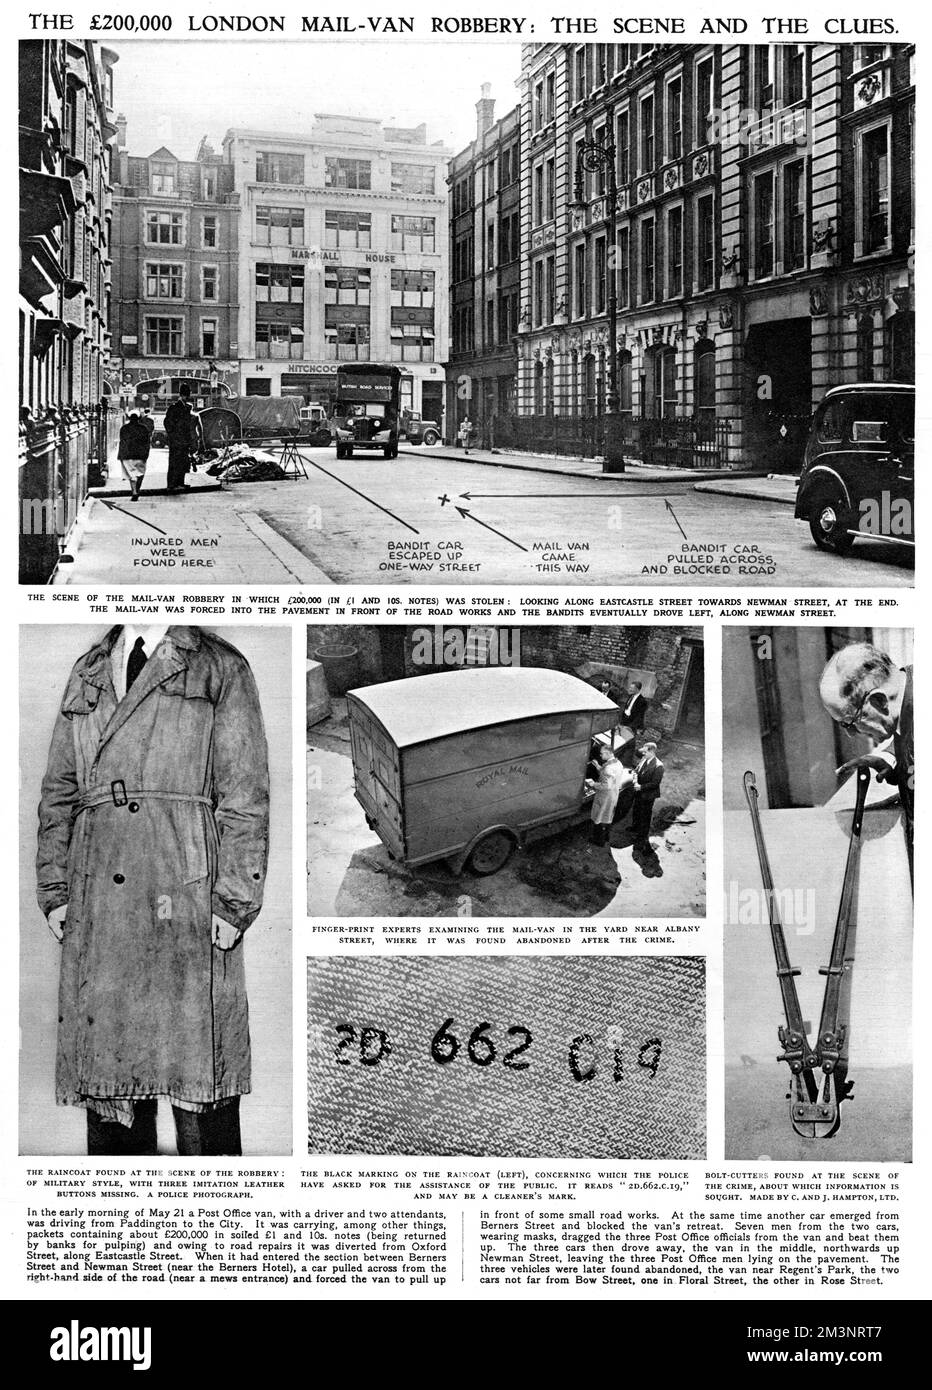 A page from the Illustrated London News, detailing the Eastcastle Street Robbery of 1952, when a Post Office van was hijacked and its contents, 200,000 in soiled notes, were stolen. The scene of the crime, the stolen mail van, the bolt cutters and raincoat found at the scene of the crime are detailed. The crime was never solved, and the money never recovered.     Date: 1952 Stock Photo